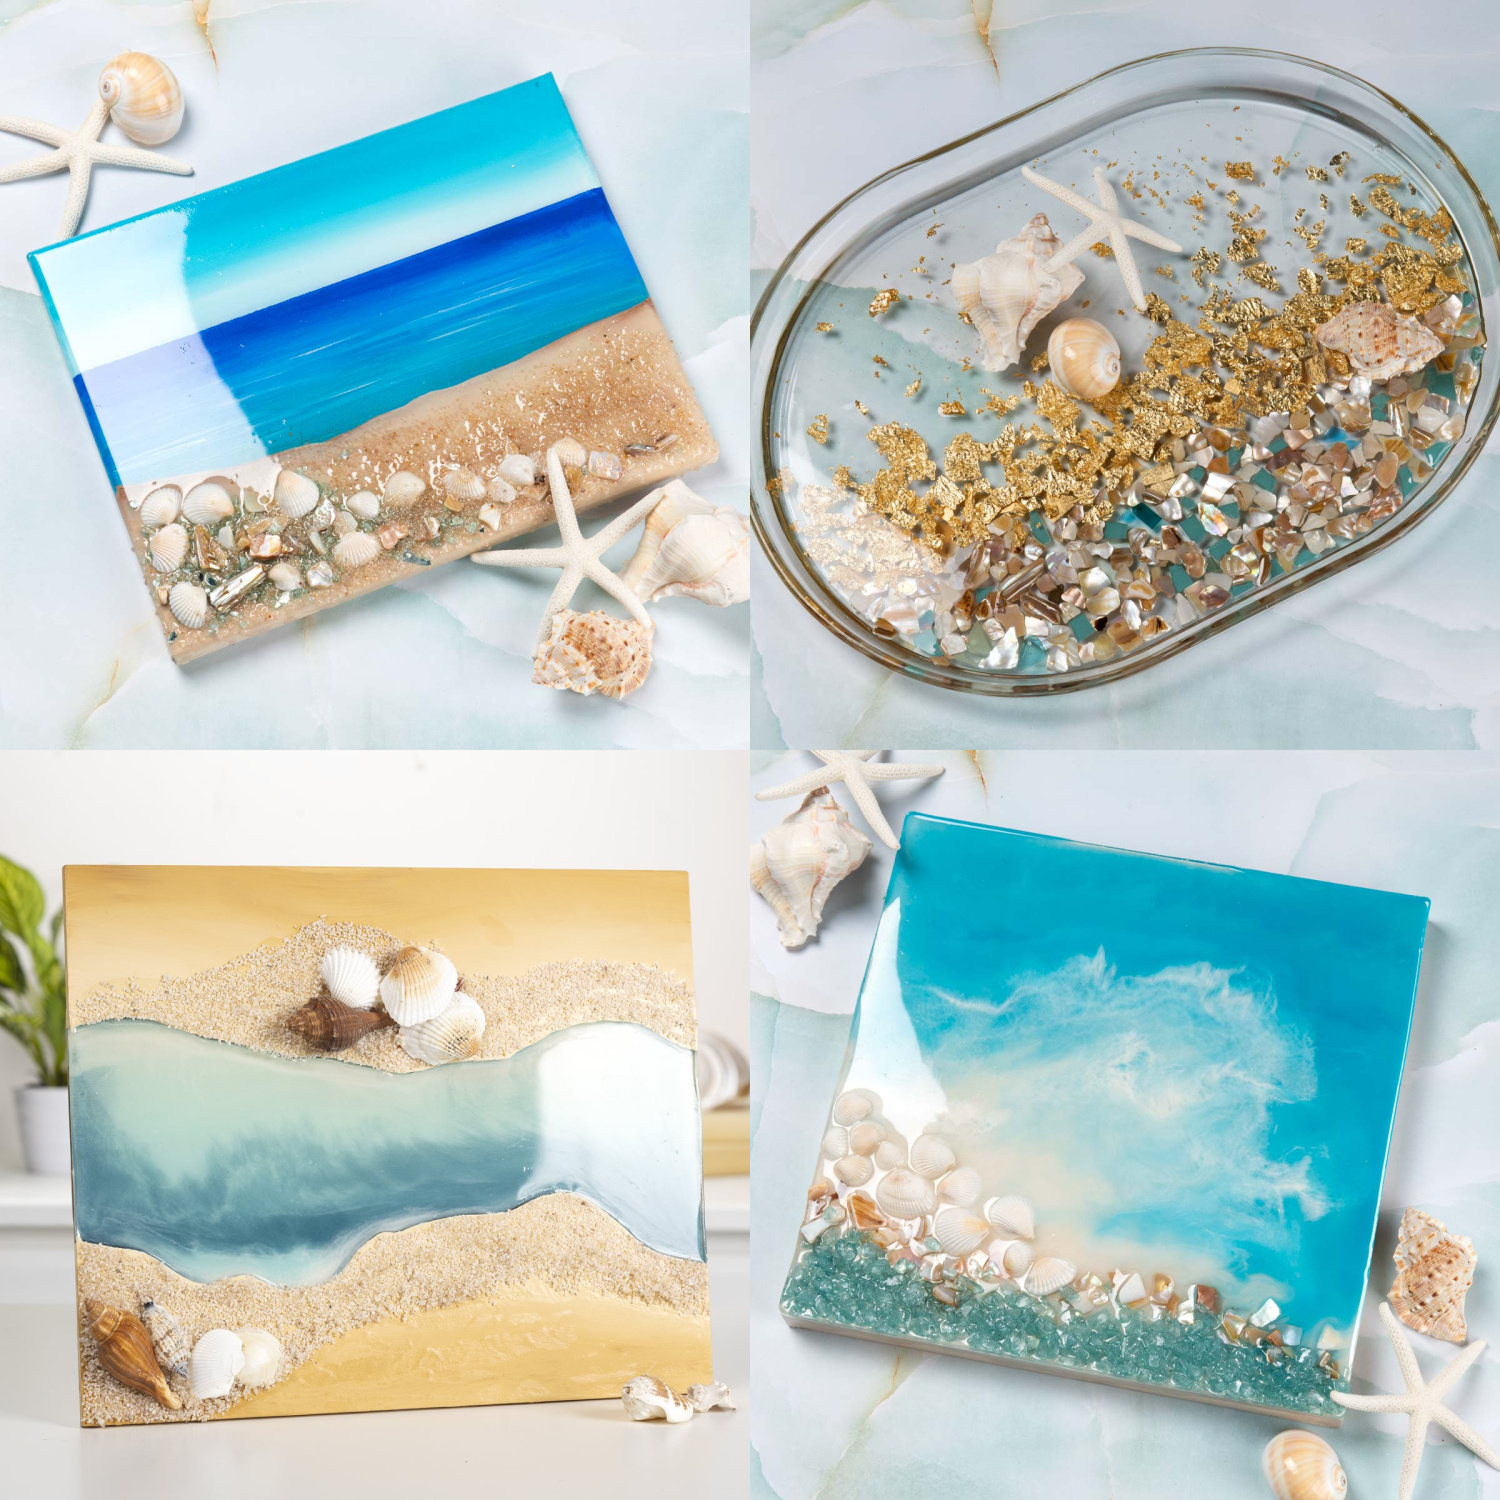 Resin Art - How To Paint The Ocean With Acrylic Paint 